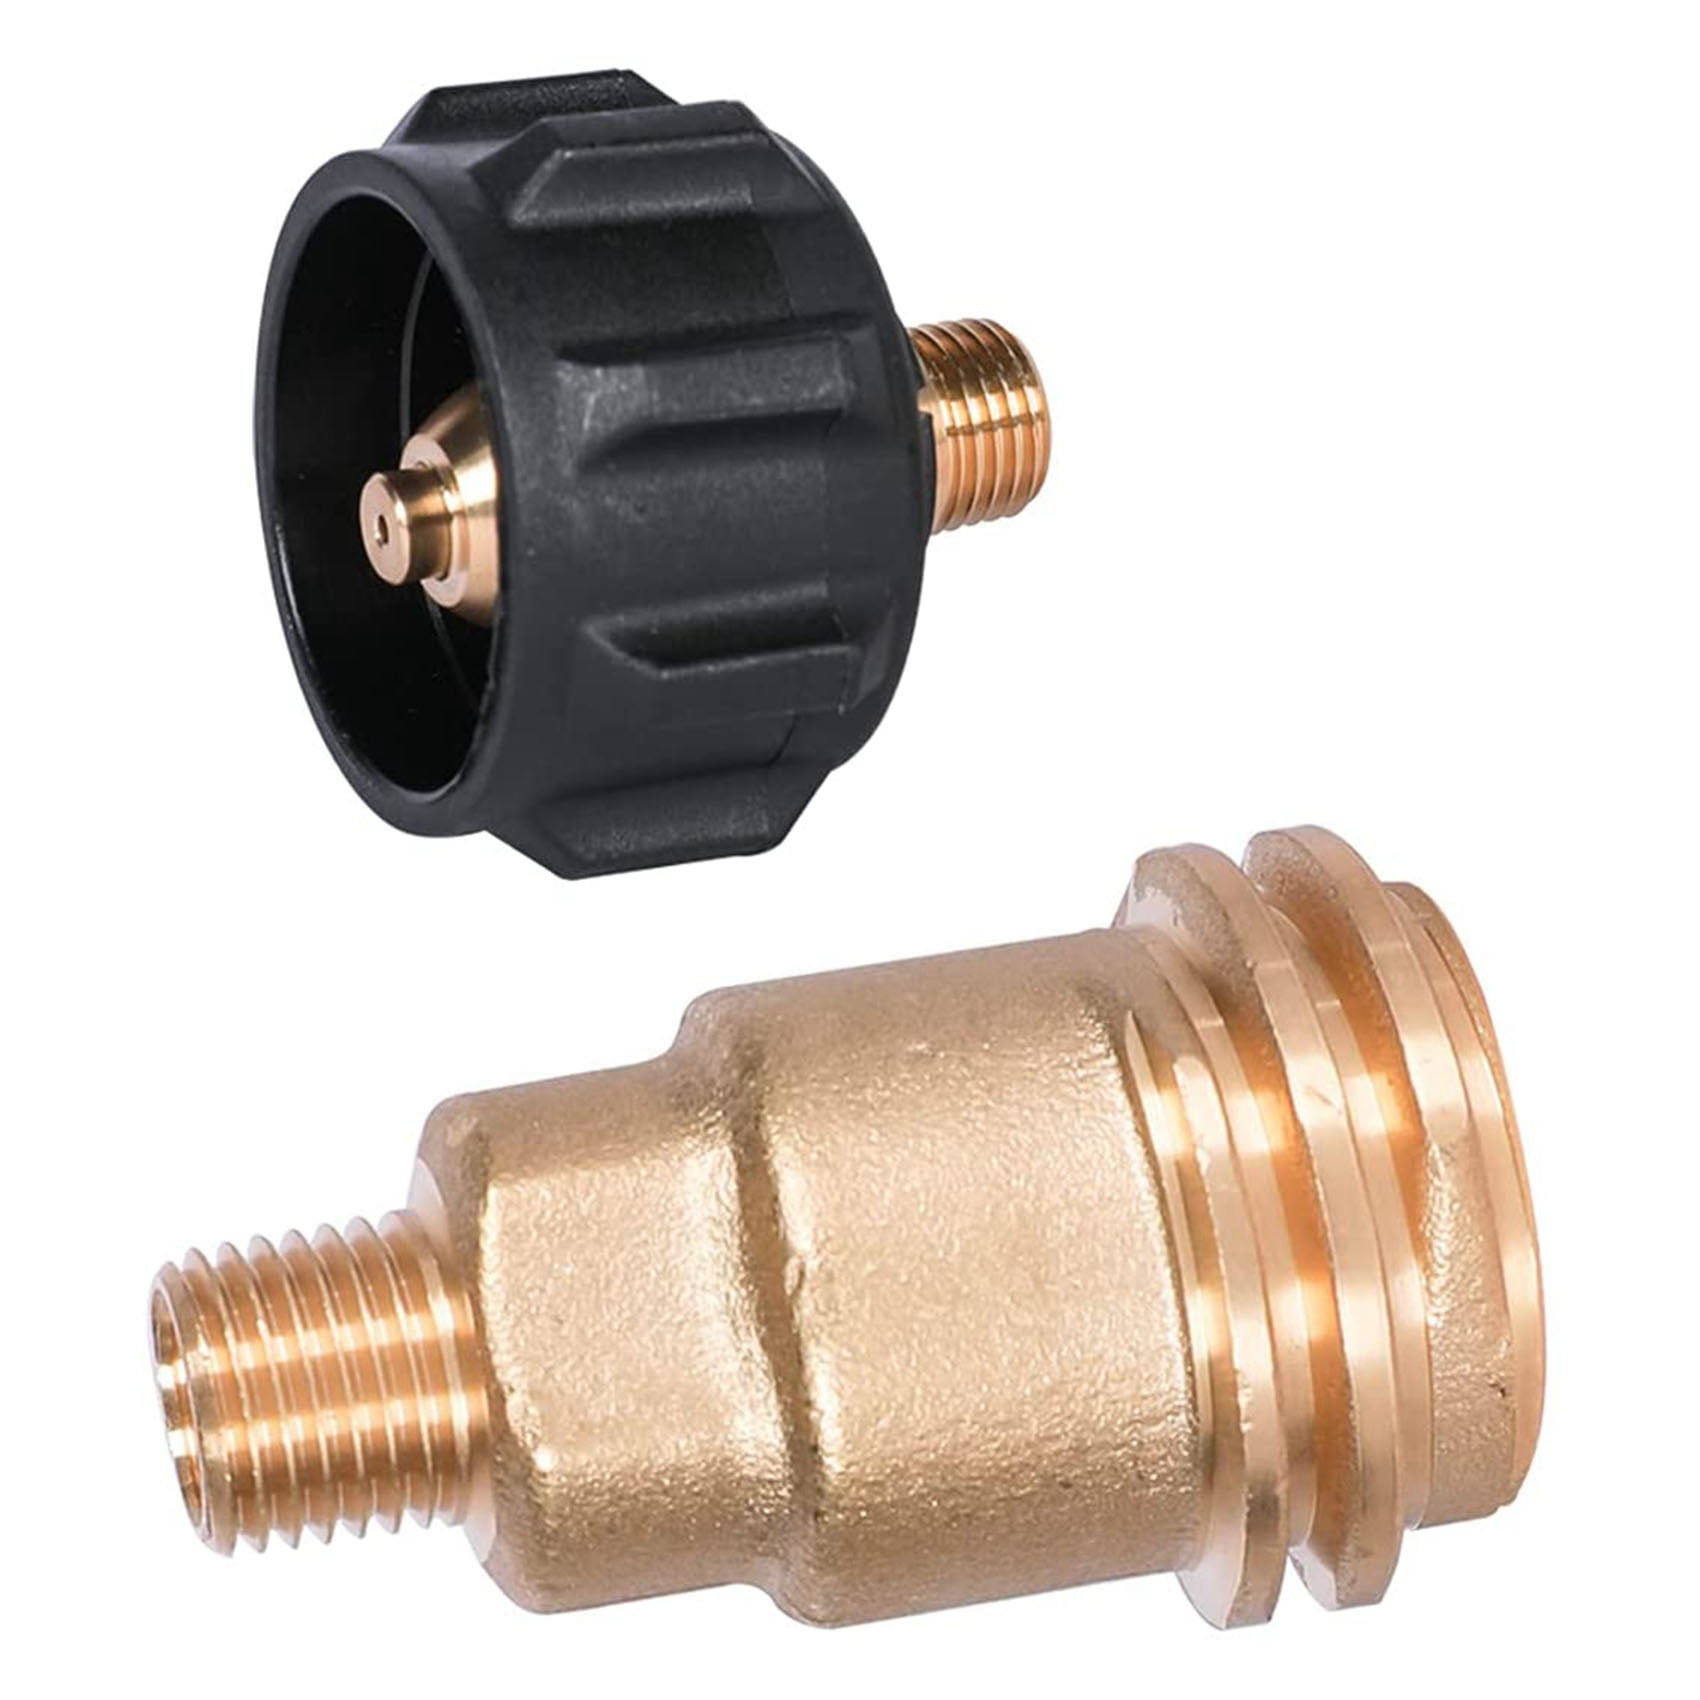 QCC1 ACME Nut Propane Gas Fitting Adapter with 1/4 Inch Male NPT 